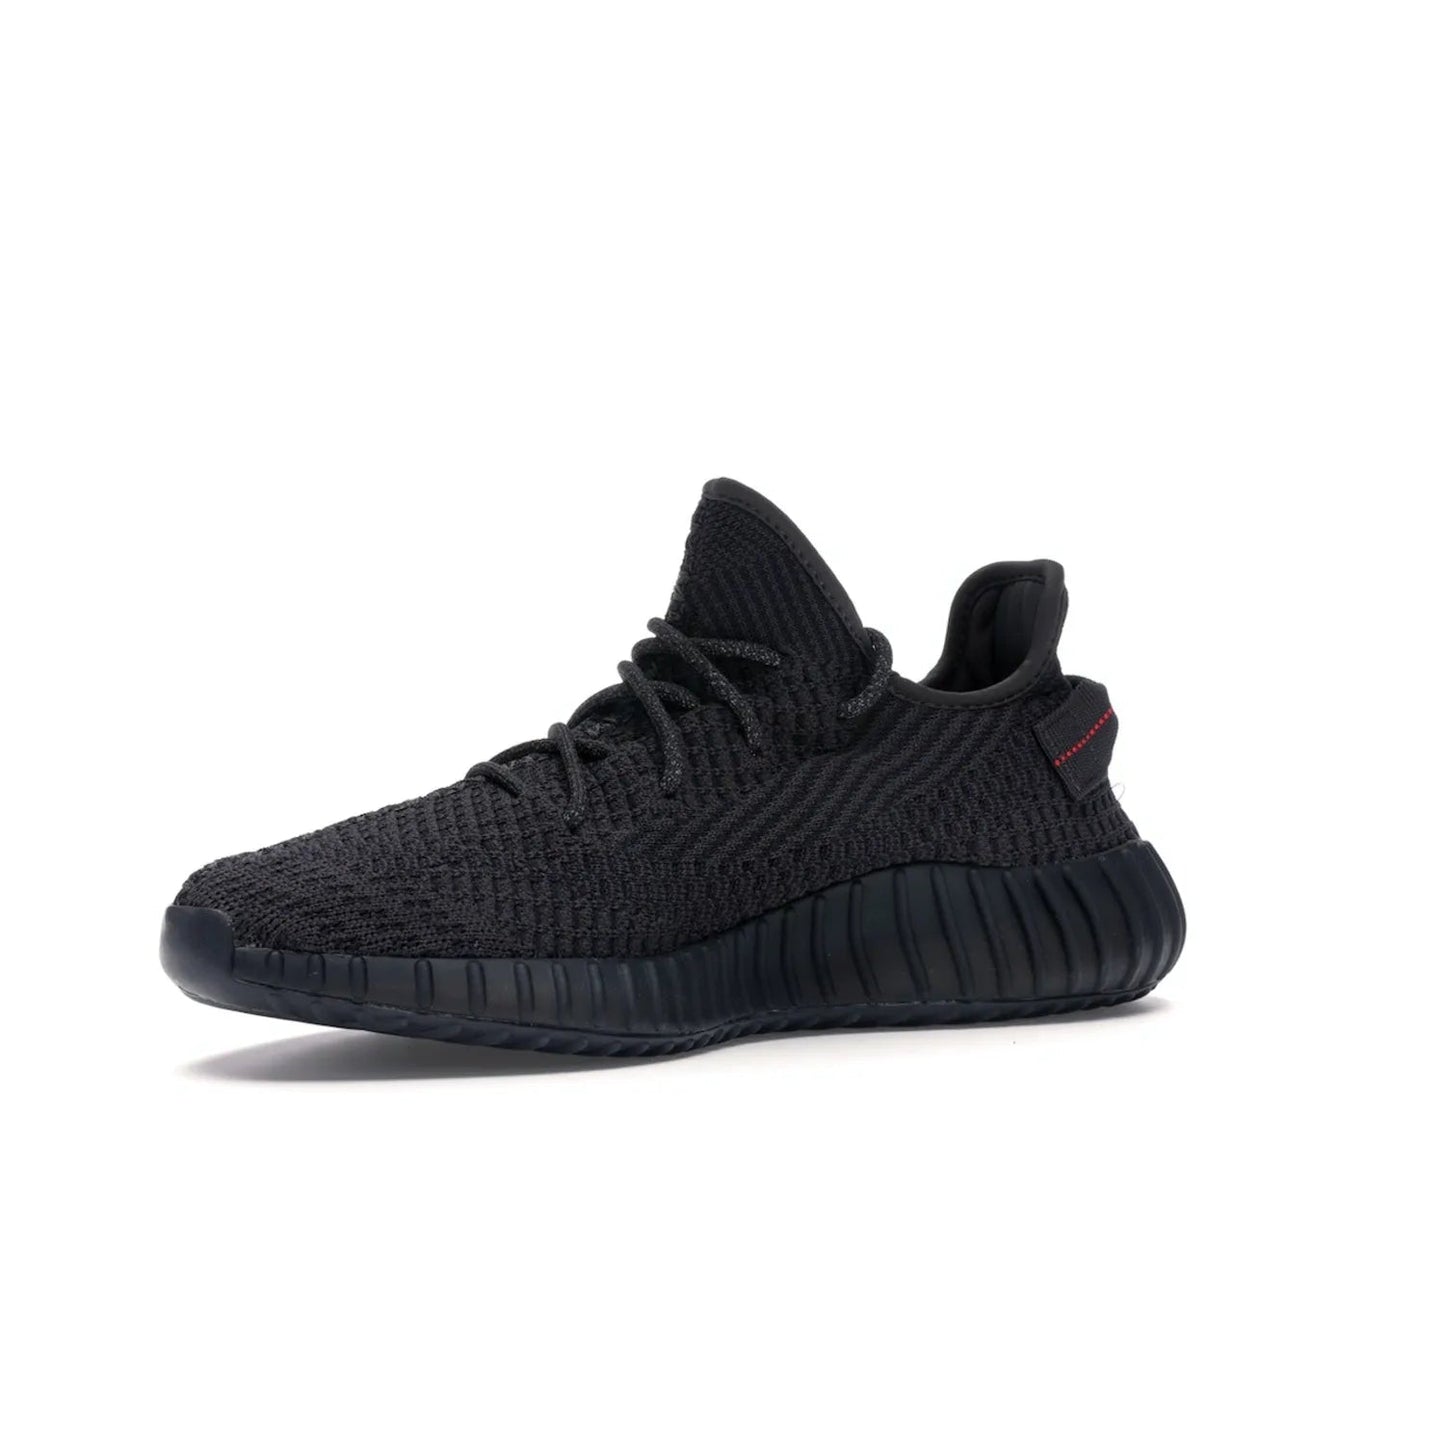 adidas Yeezy Boost 350 V2 Black (Non-Reflective) - Image 16 - Only at www.BallersClubKickz.com - A timeless, sleek silhouette crafted from quality materials. The adidas Yeezy Boost 350 V2 Black (Non-Reflective) brings style and sophistication. Get yours now!